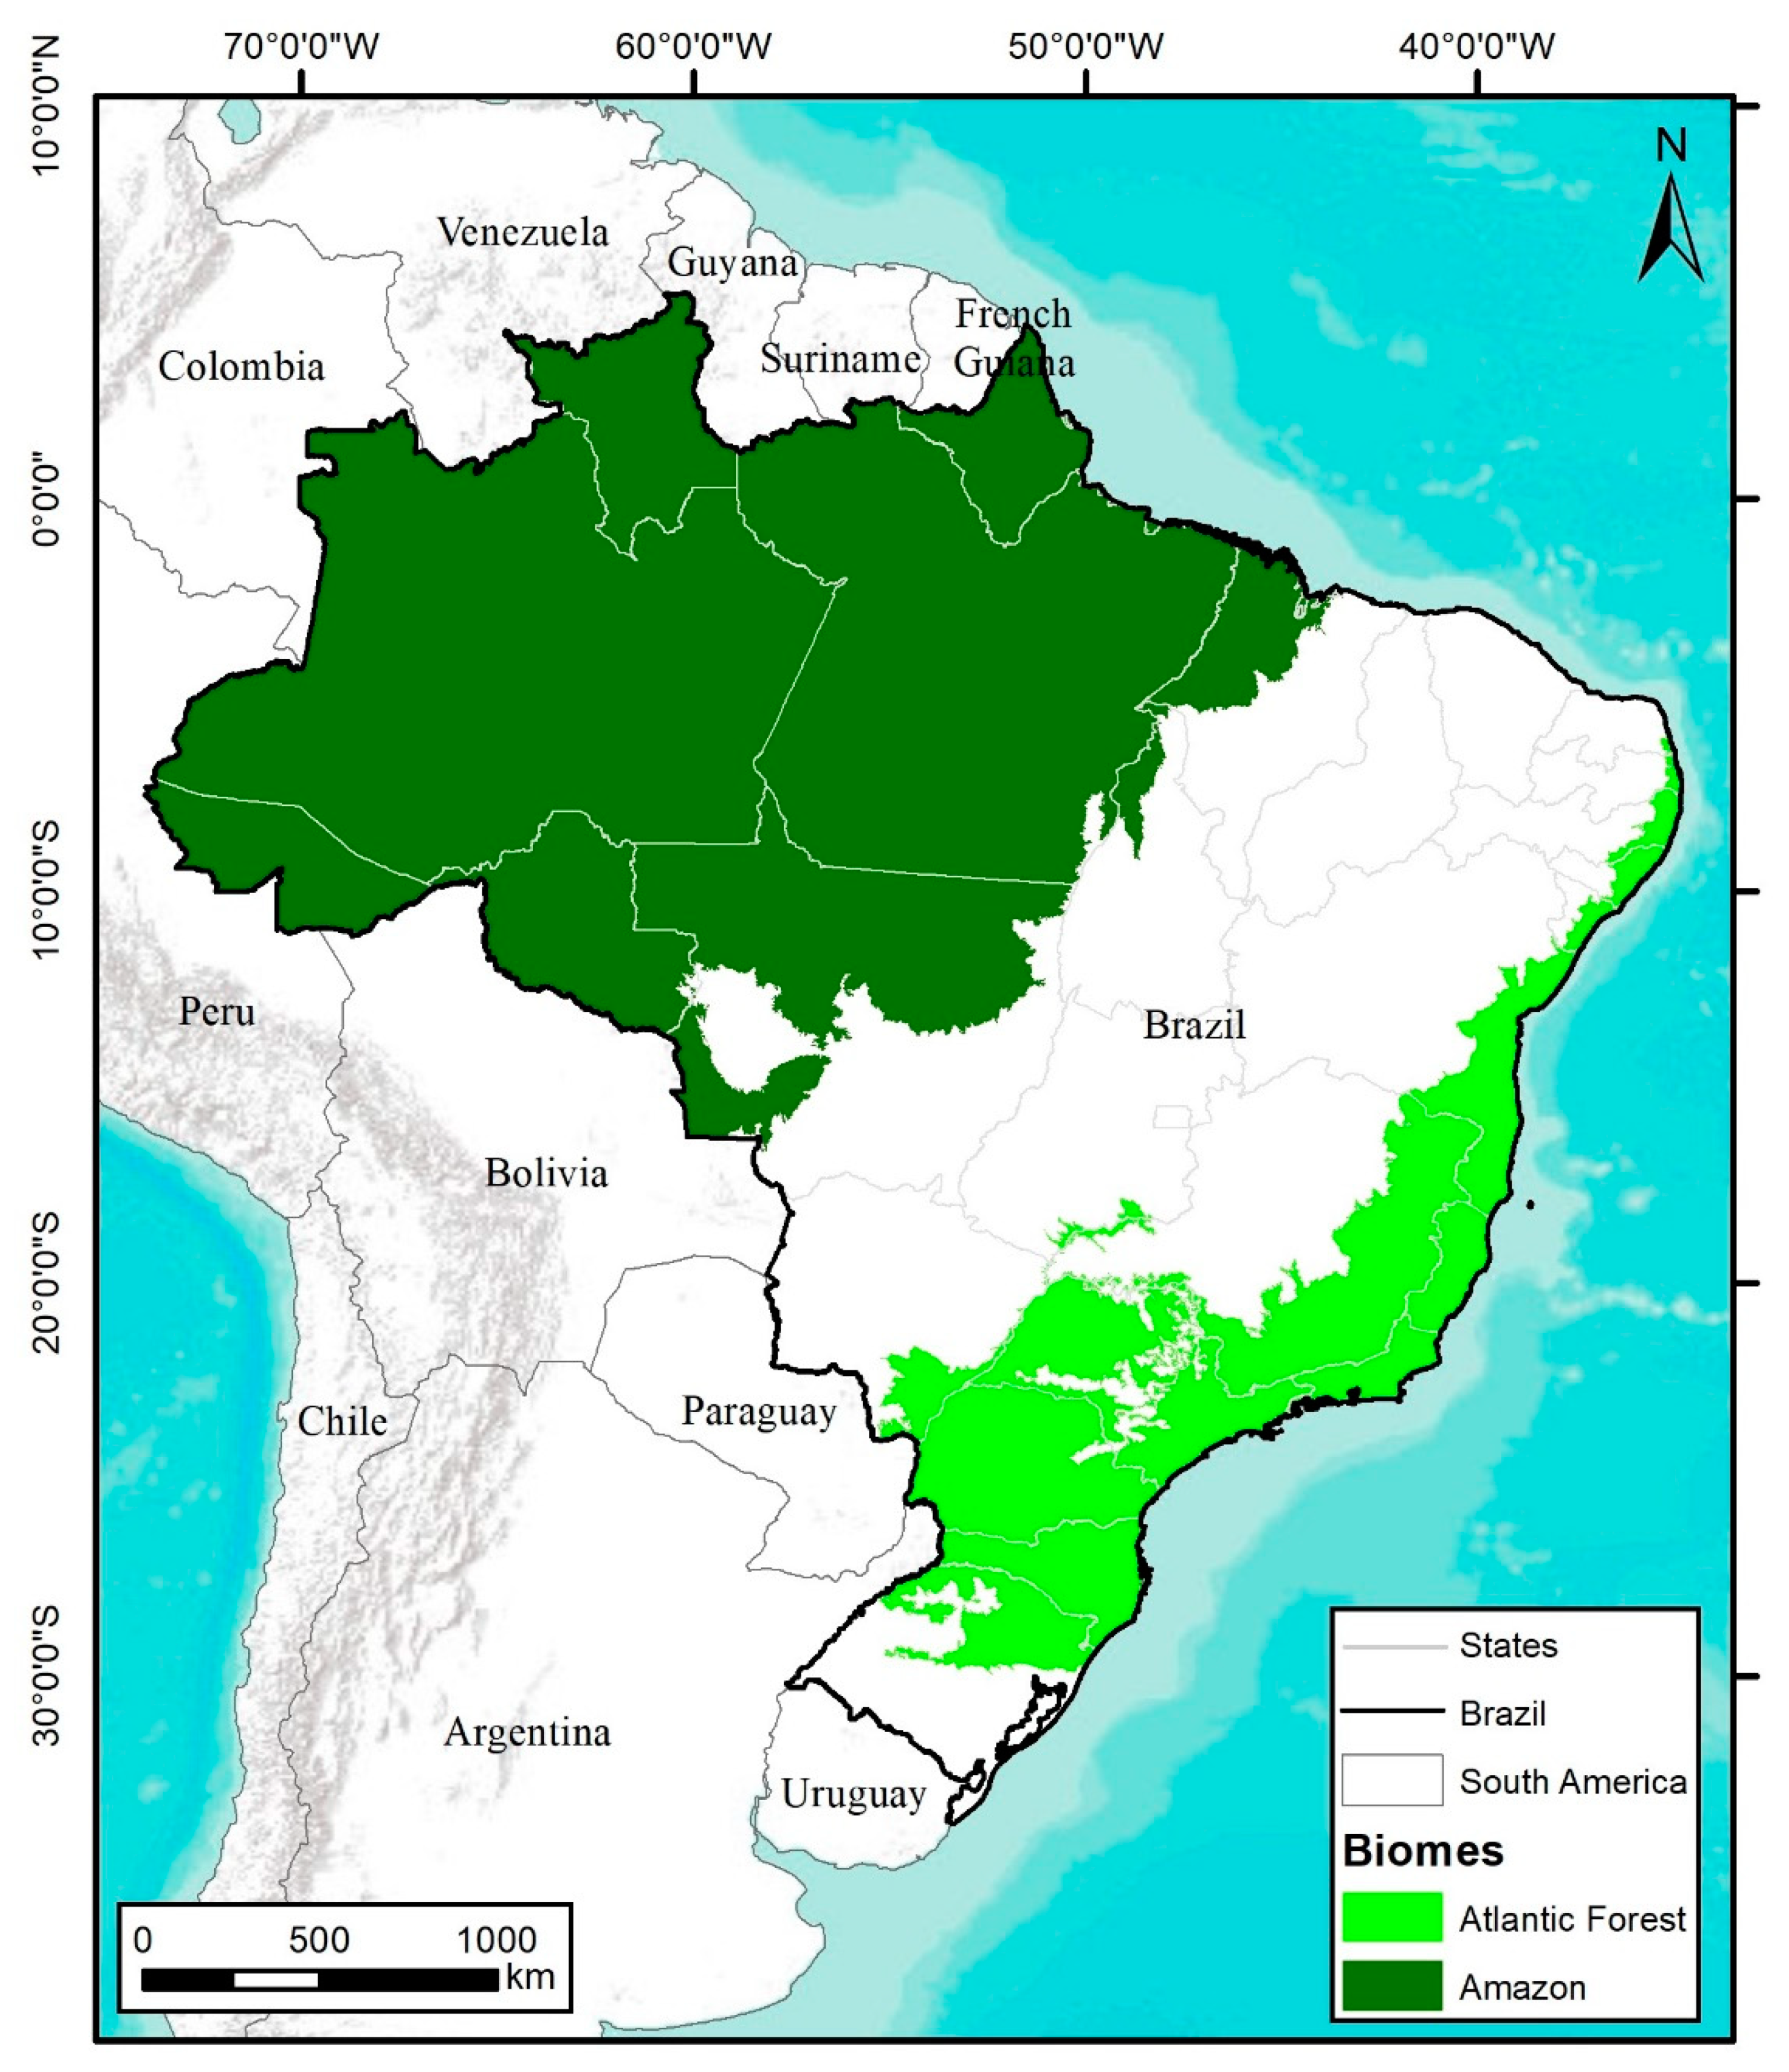 The Southern Atlantic Forest: Use, Degradation, and Perspectives